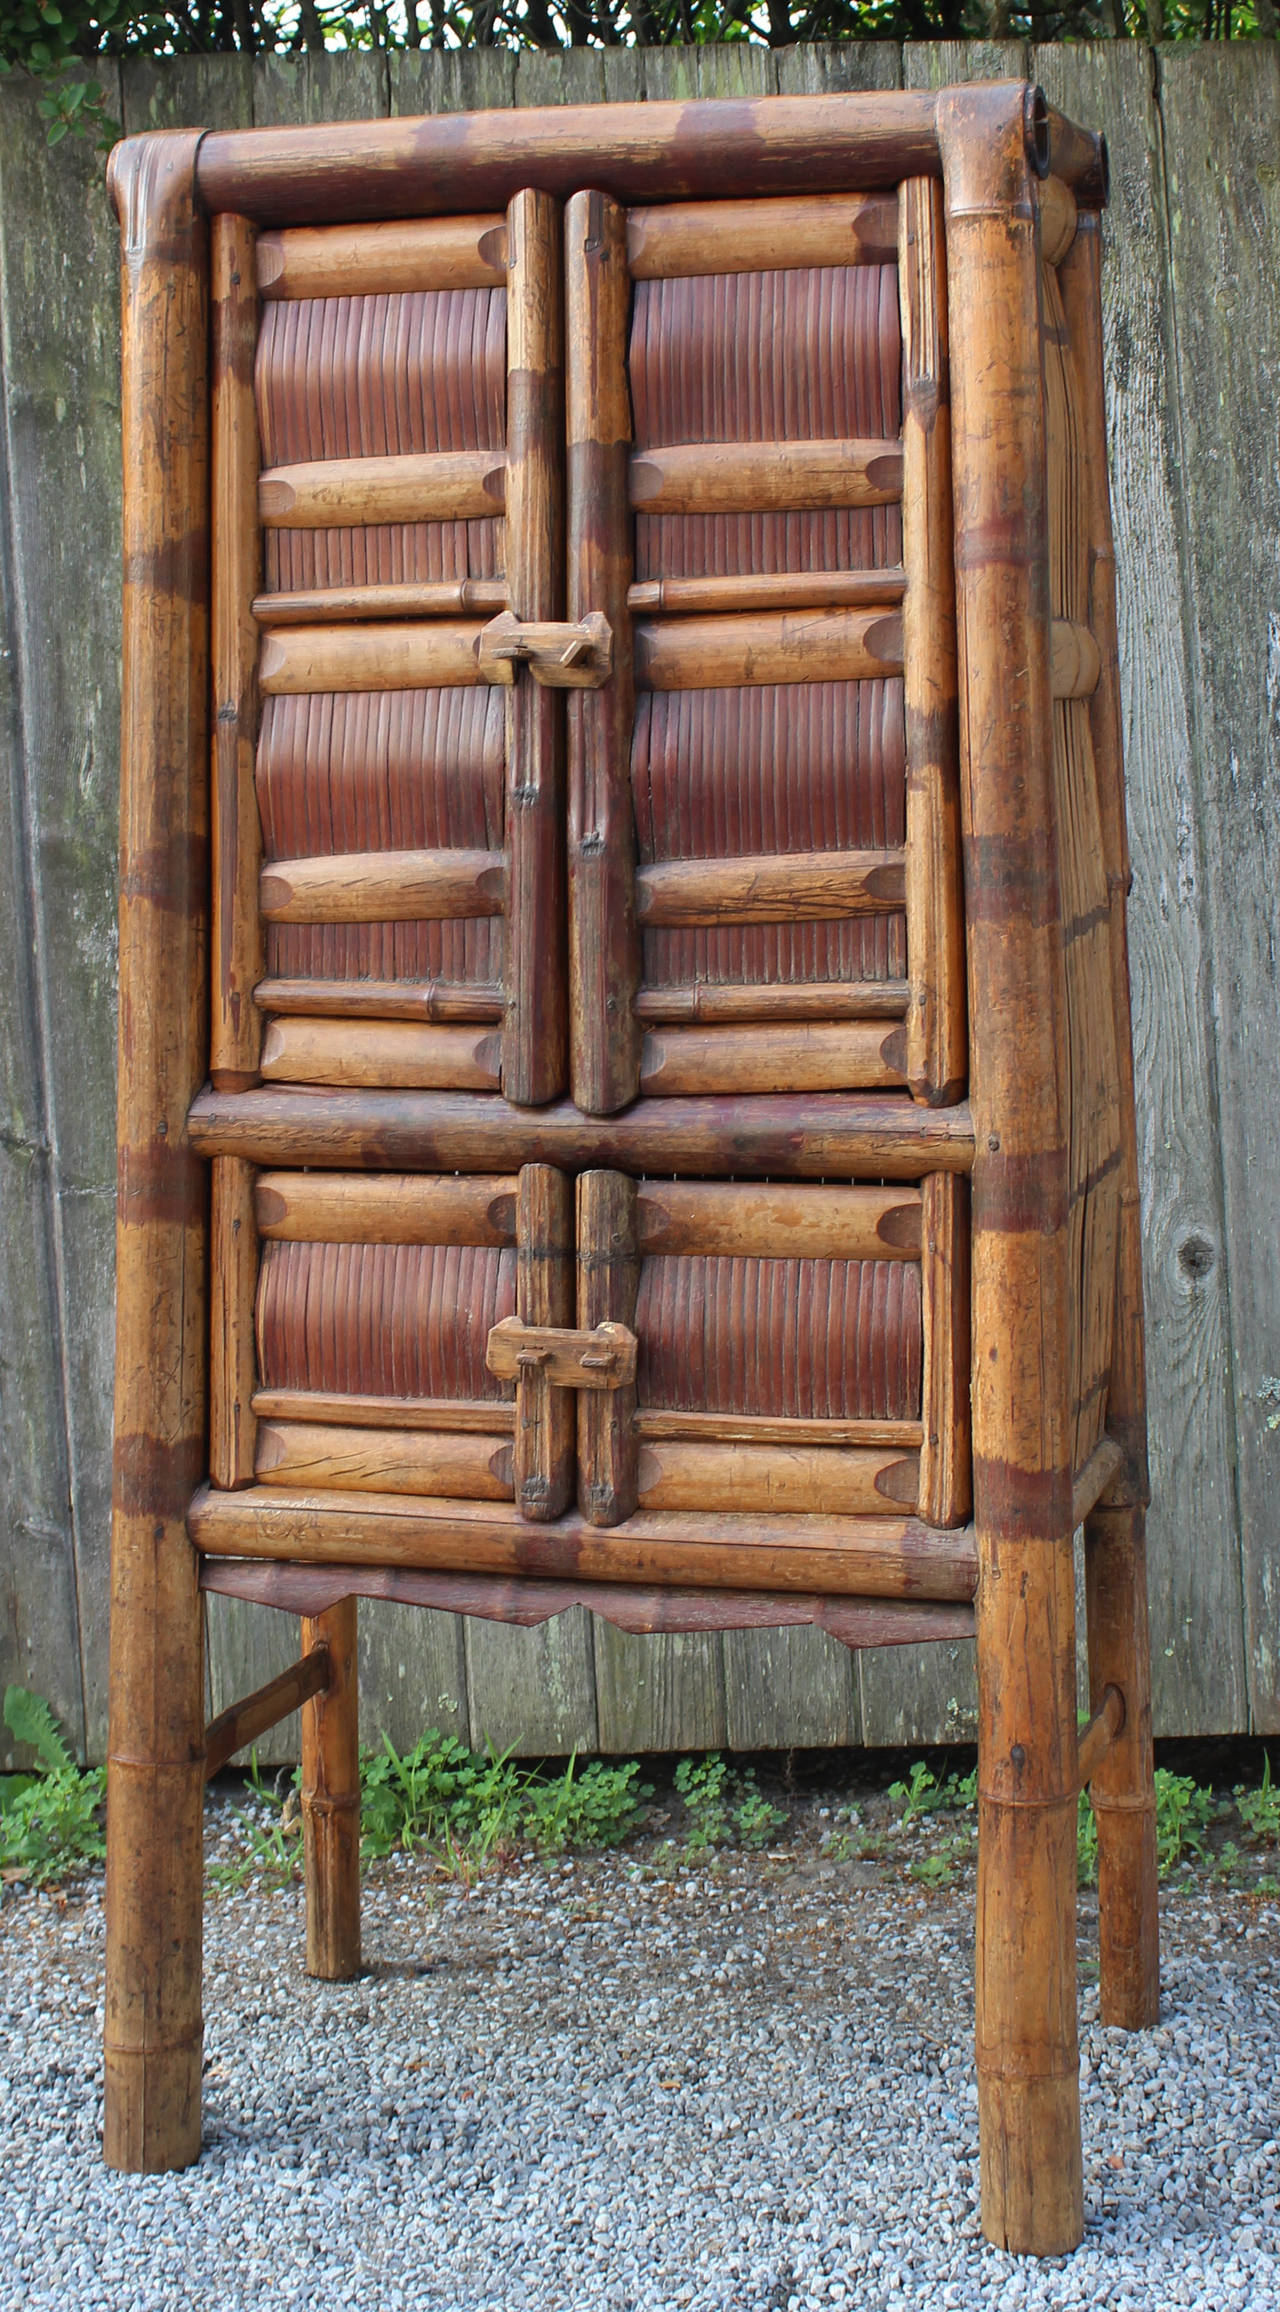 An early 20th century Asian bamboo cabinet with shelves and wood latch details.